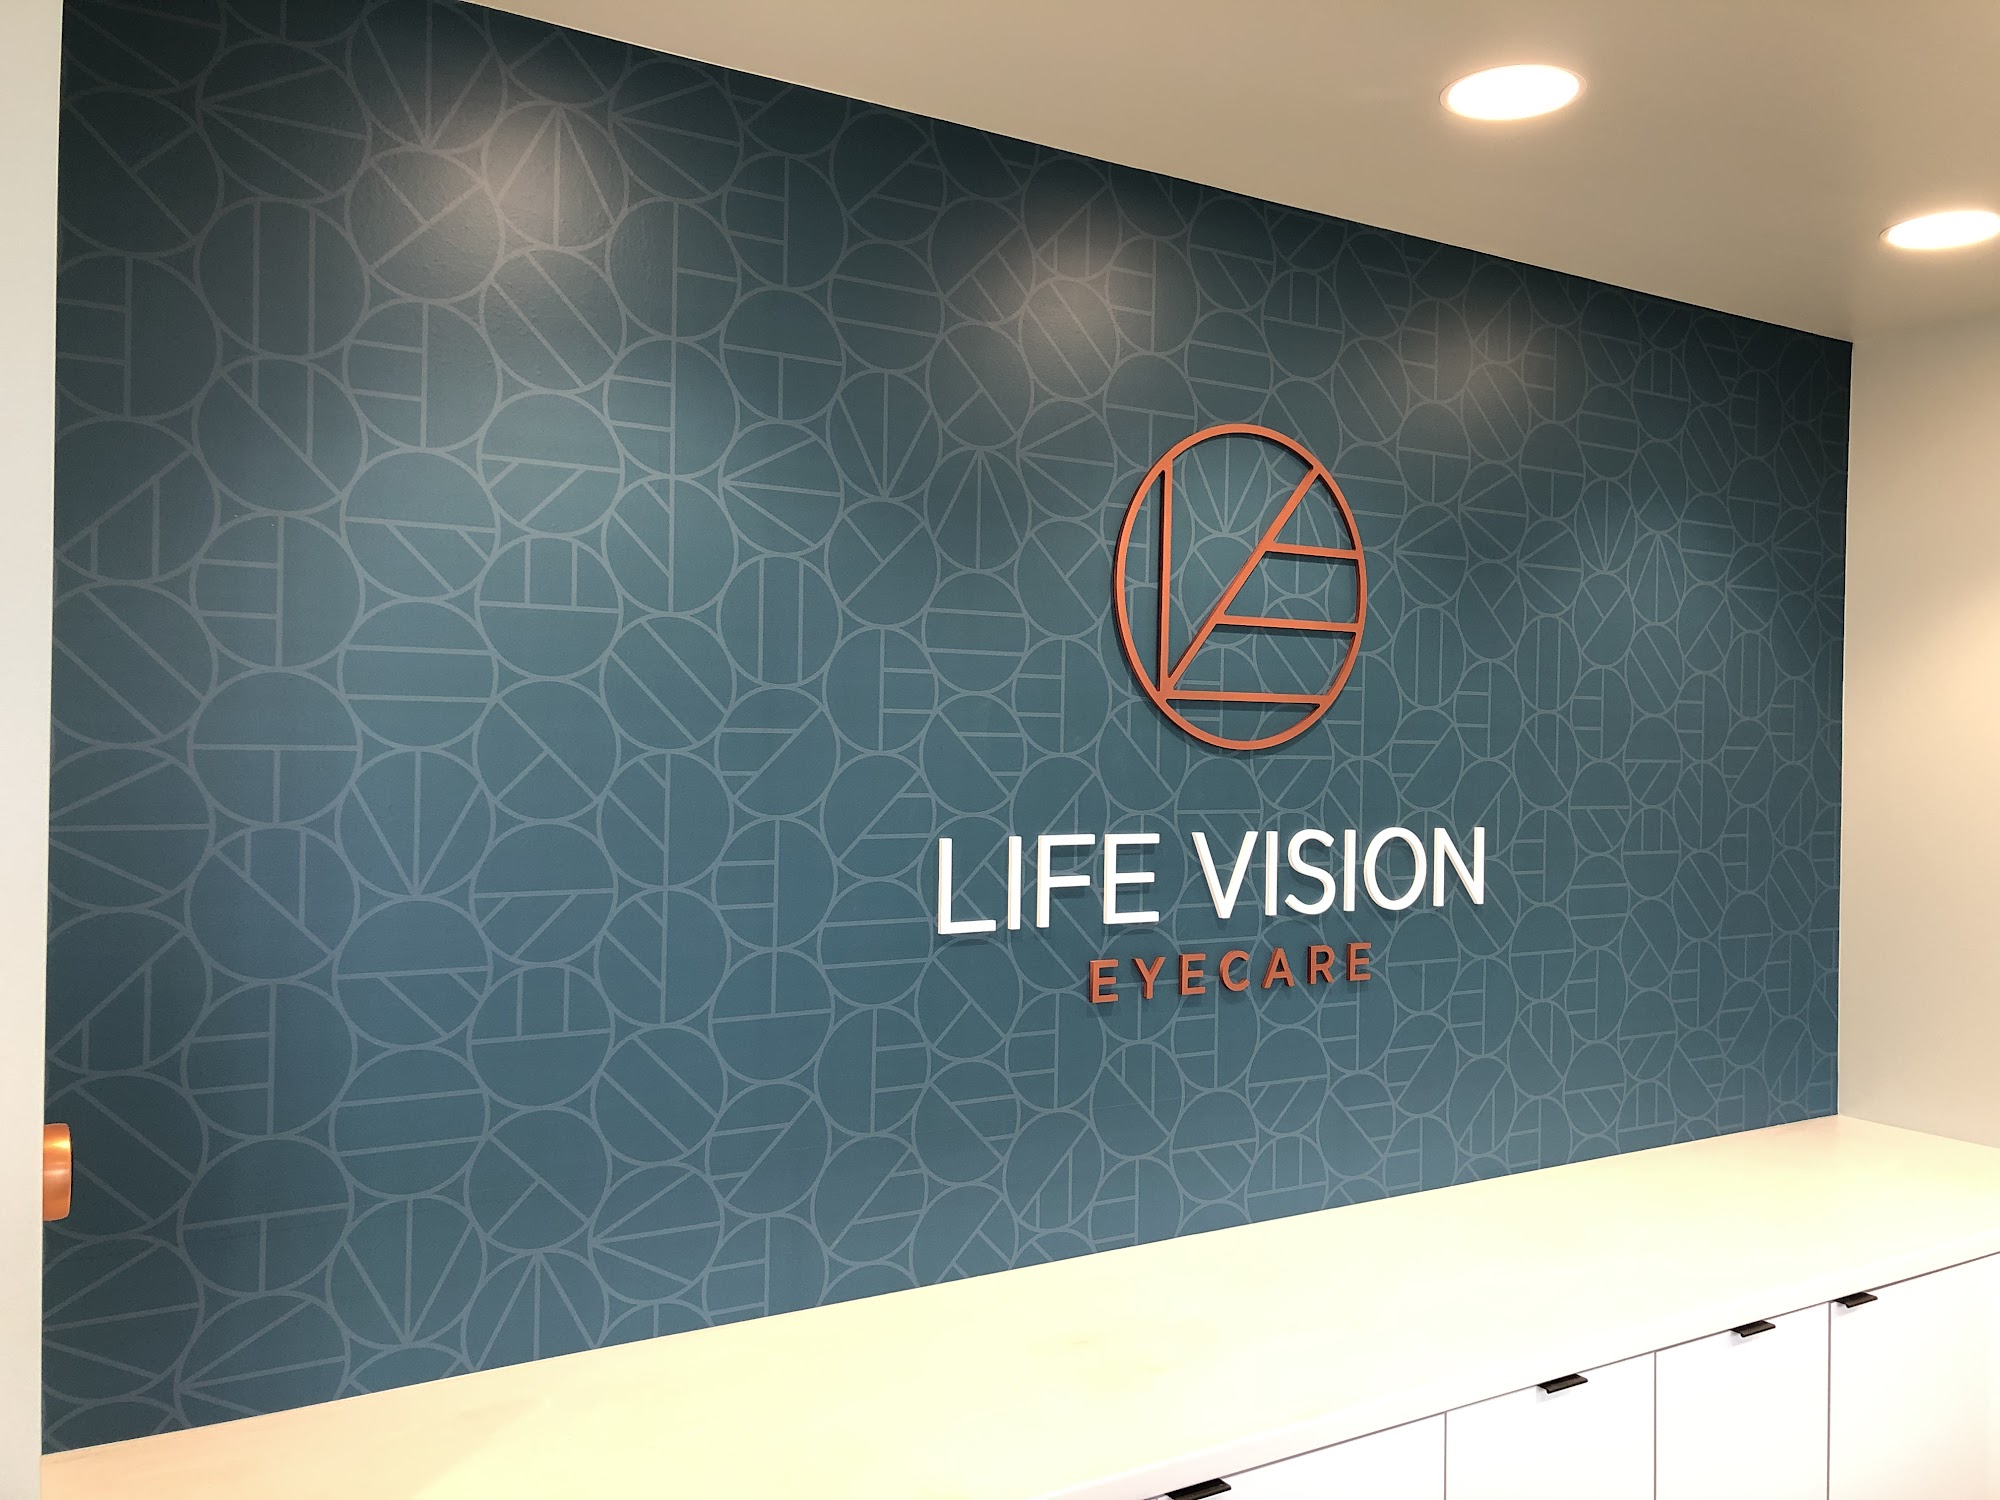 Life Vision Eyecare 5770 Red Arrow Hwy, Stevensville Michigan 49127